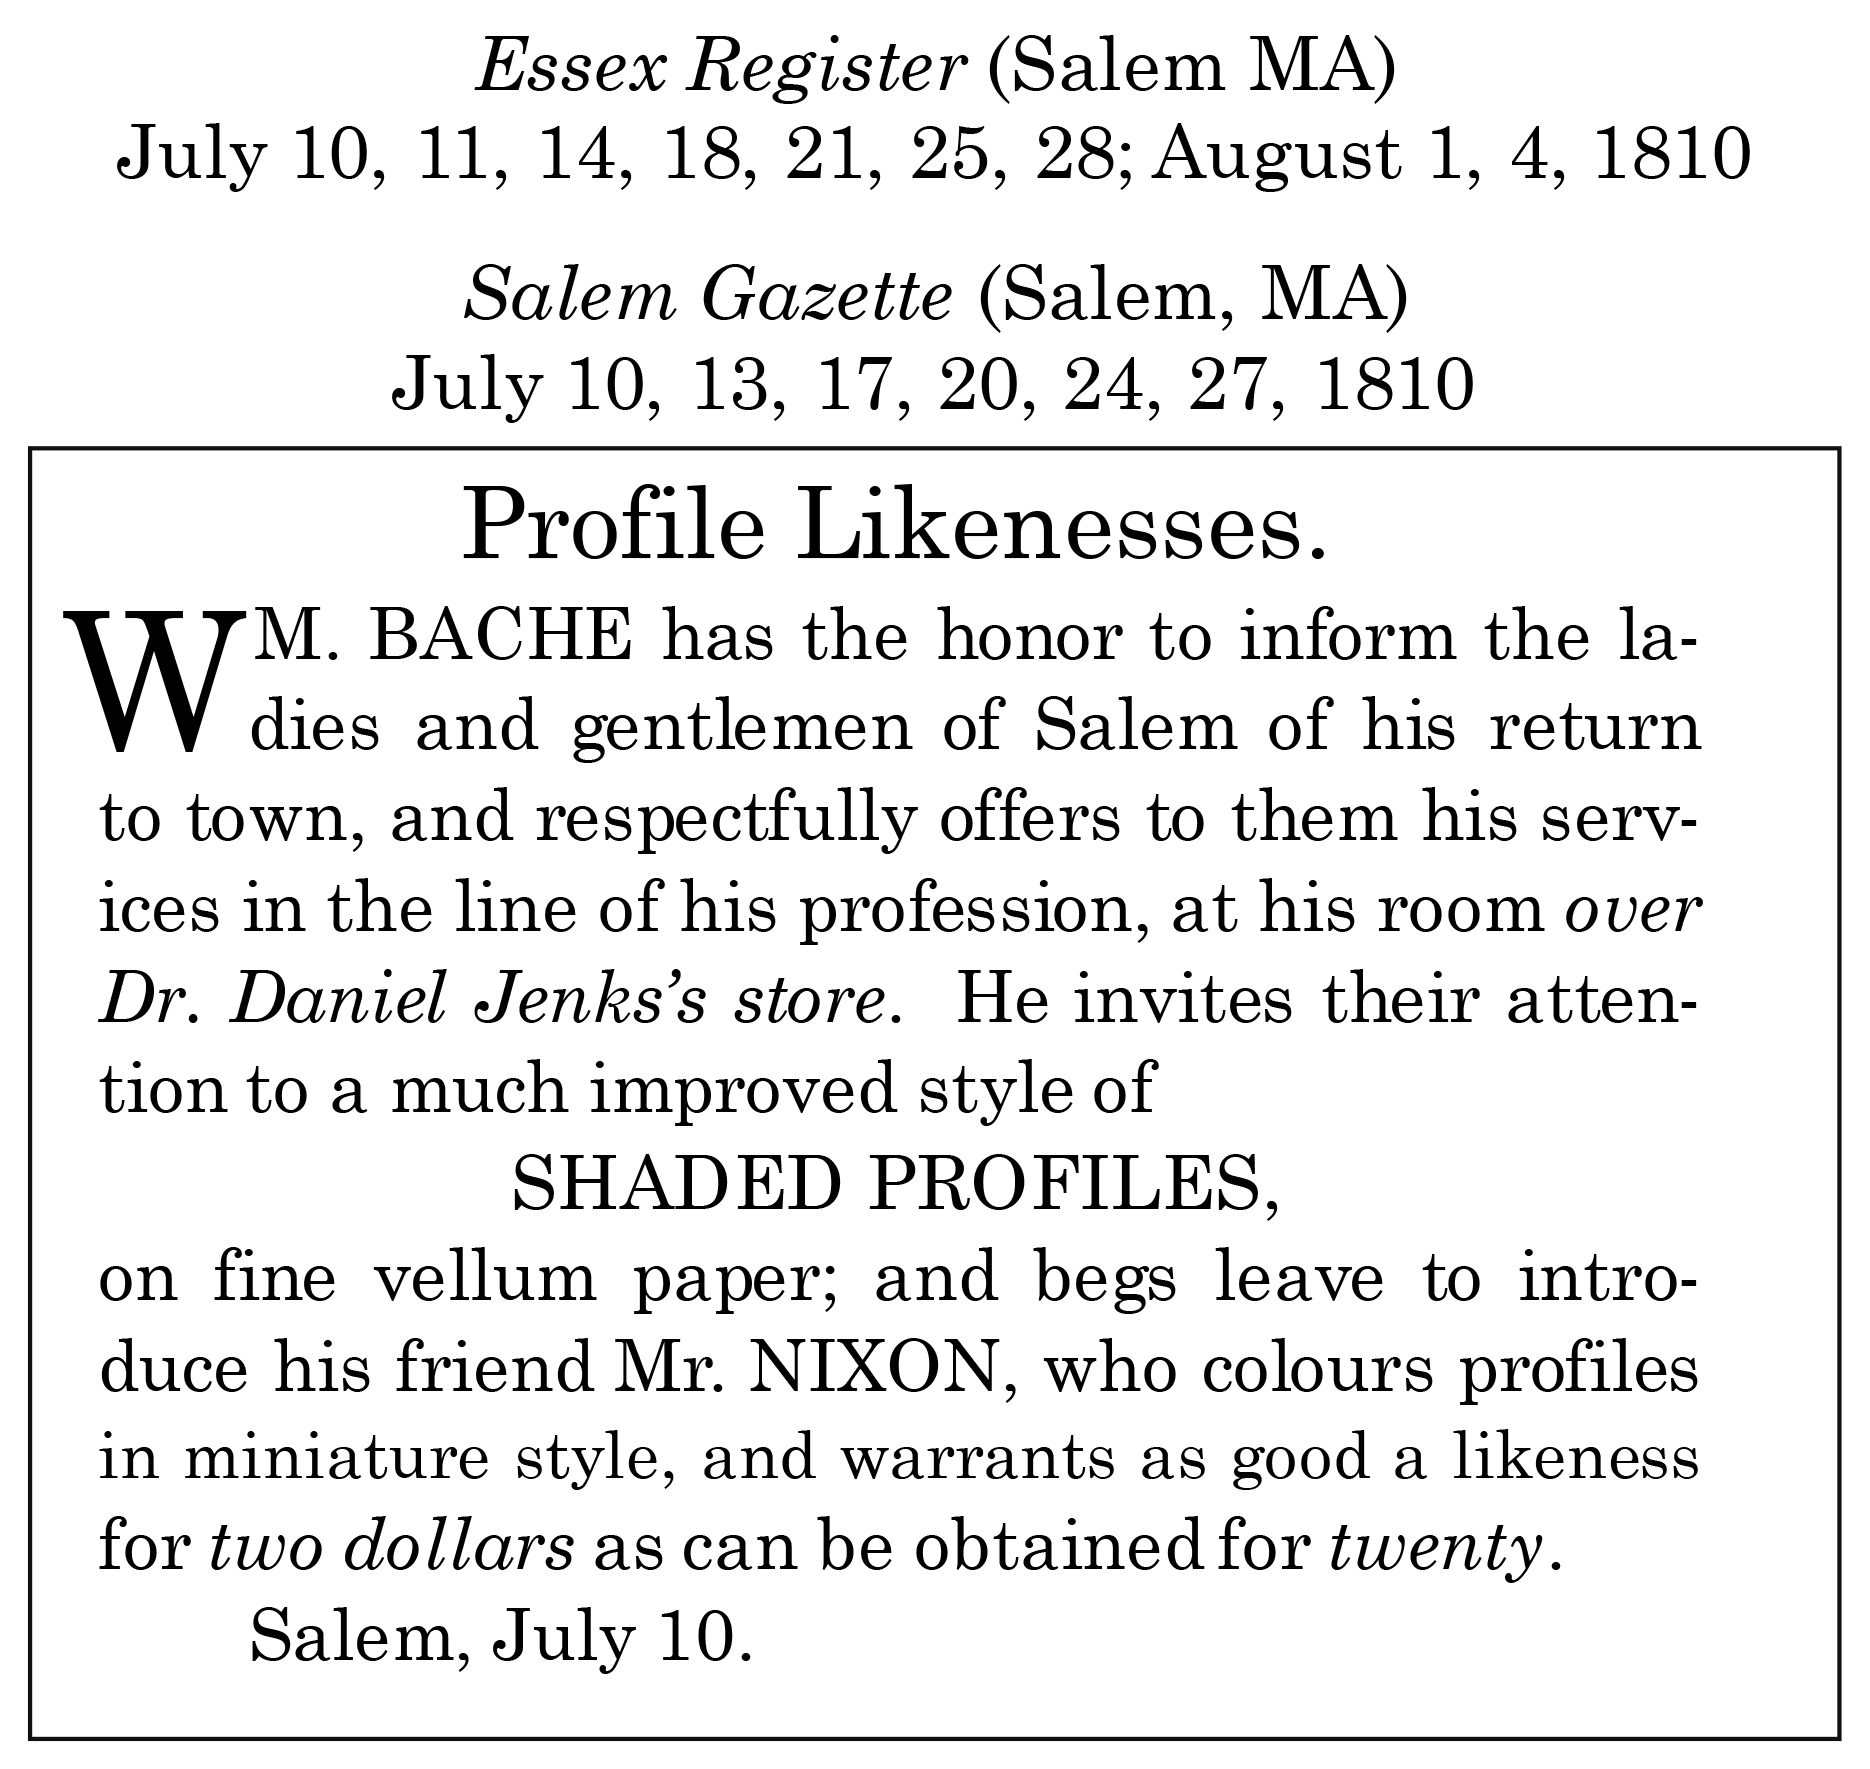 William Bache newspaper advertisement clipping